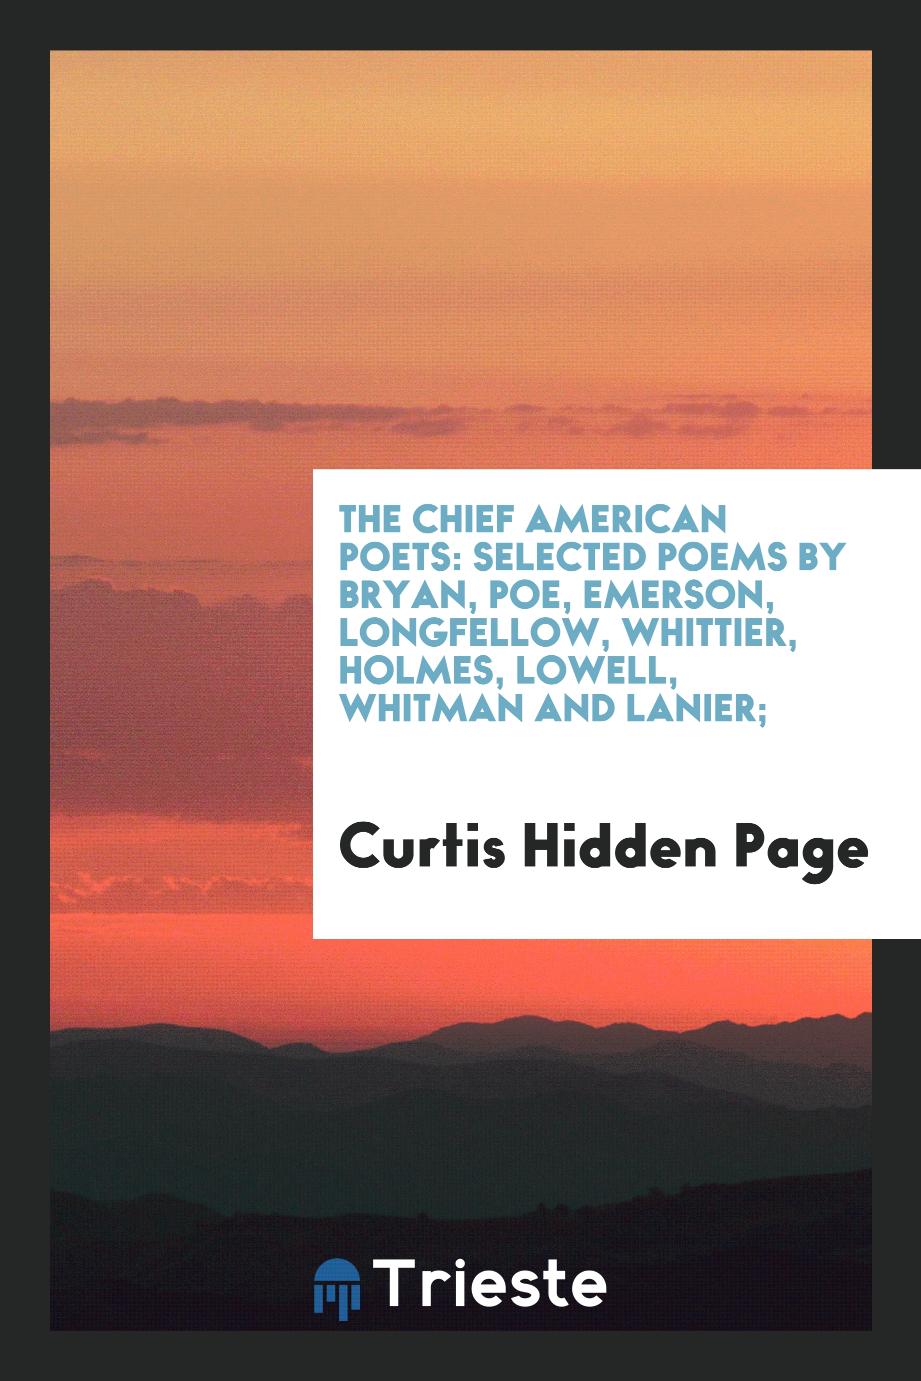 The chief American poets: selected poems by Bryan, Poe, Emerson, Longfellow, Whittier, Holmes, Lowell, Whitman and Lanier;